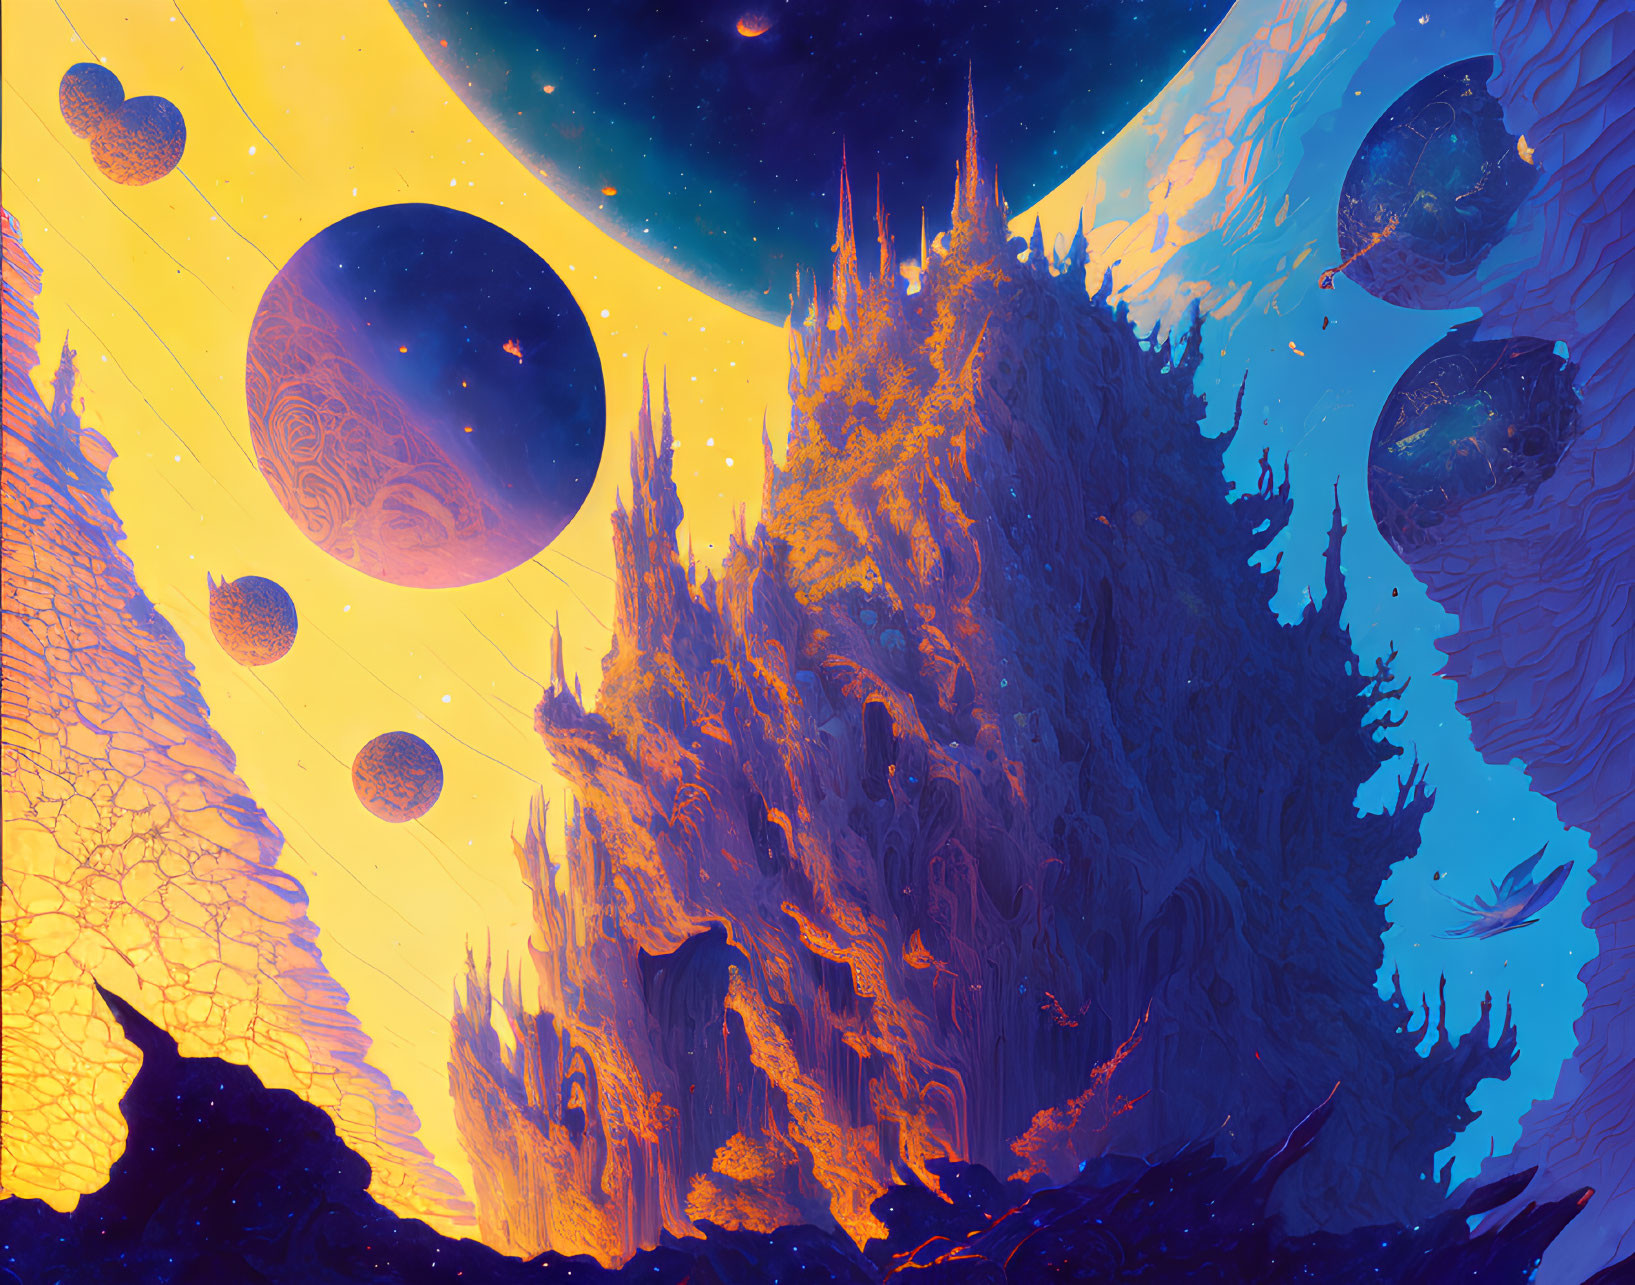 Majestic alien landscape with spires, floating islands, moons, and colorful sky